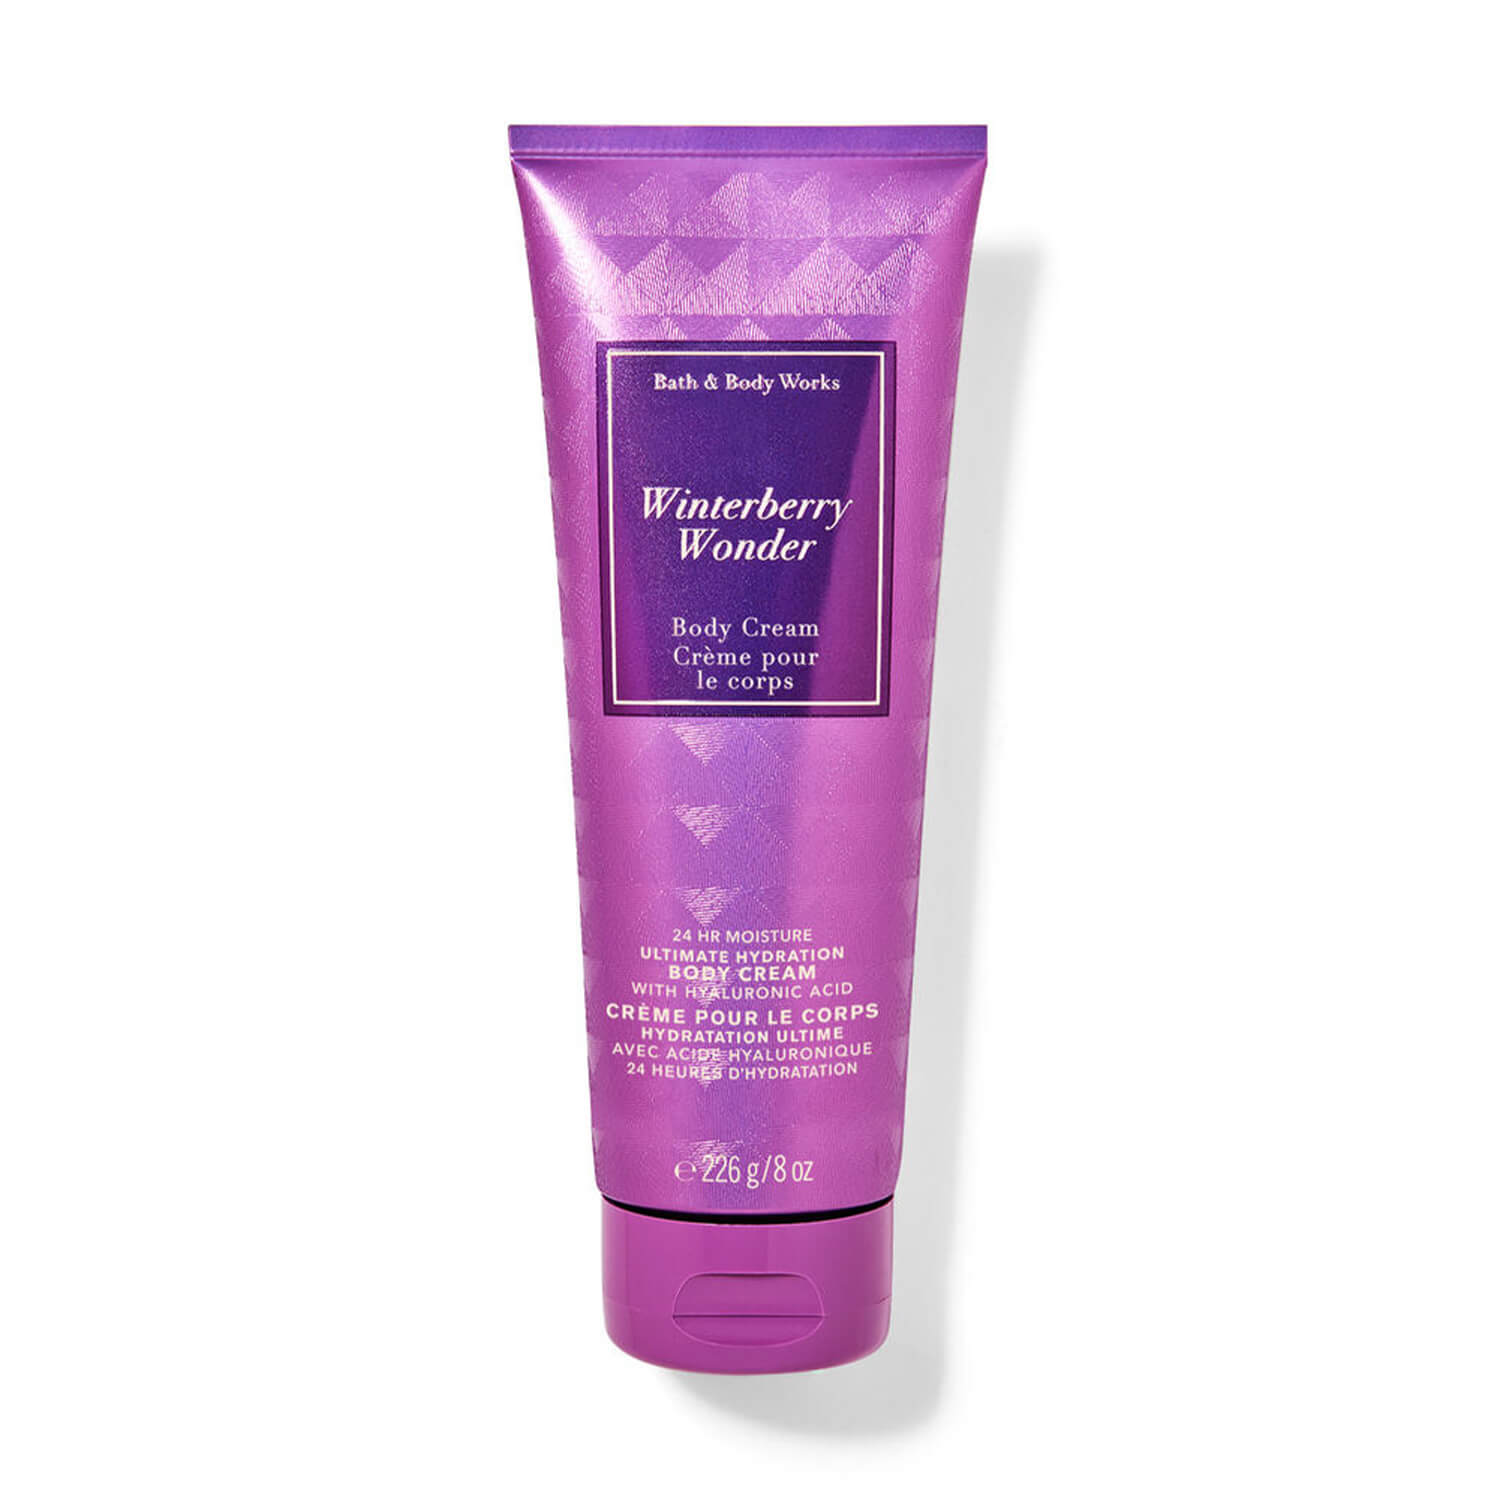 buy bath and body works cream in winterberry wonder fragrance available for delivery in  Pakistan